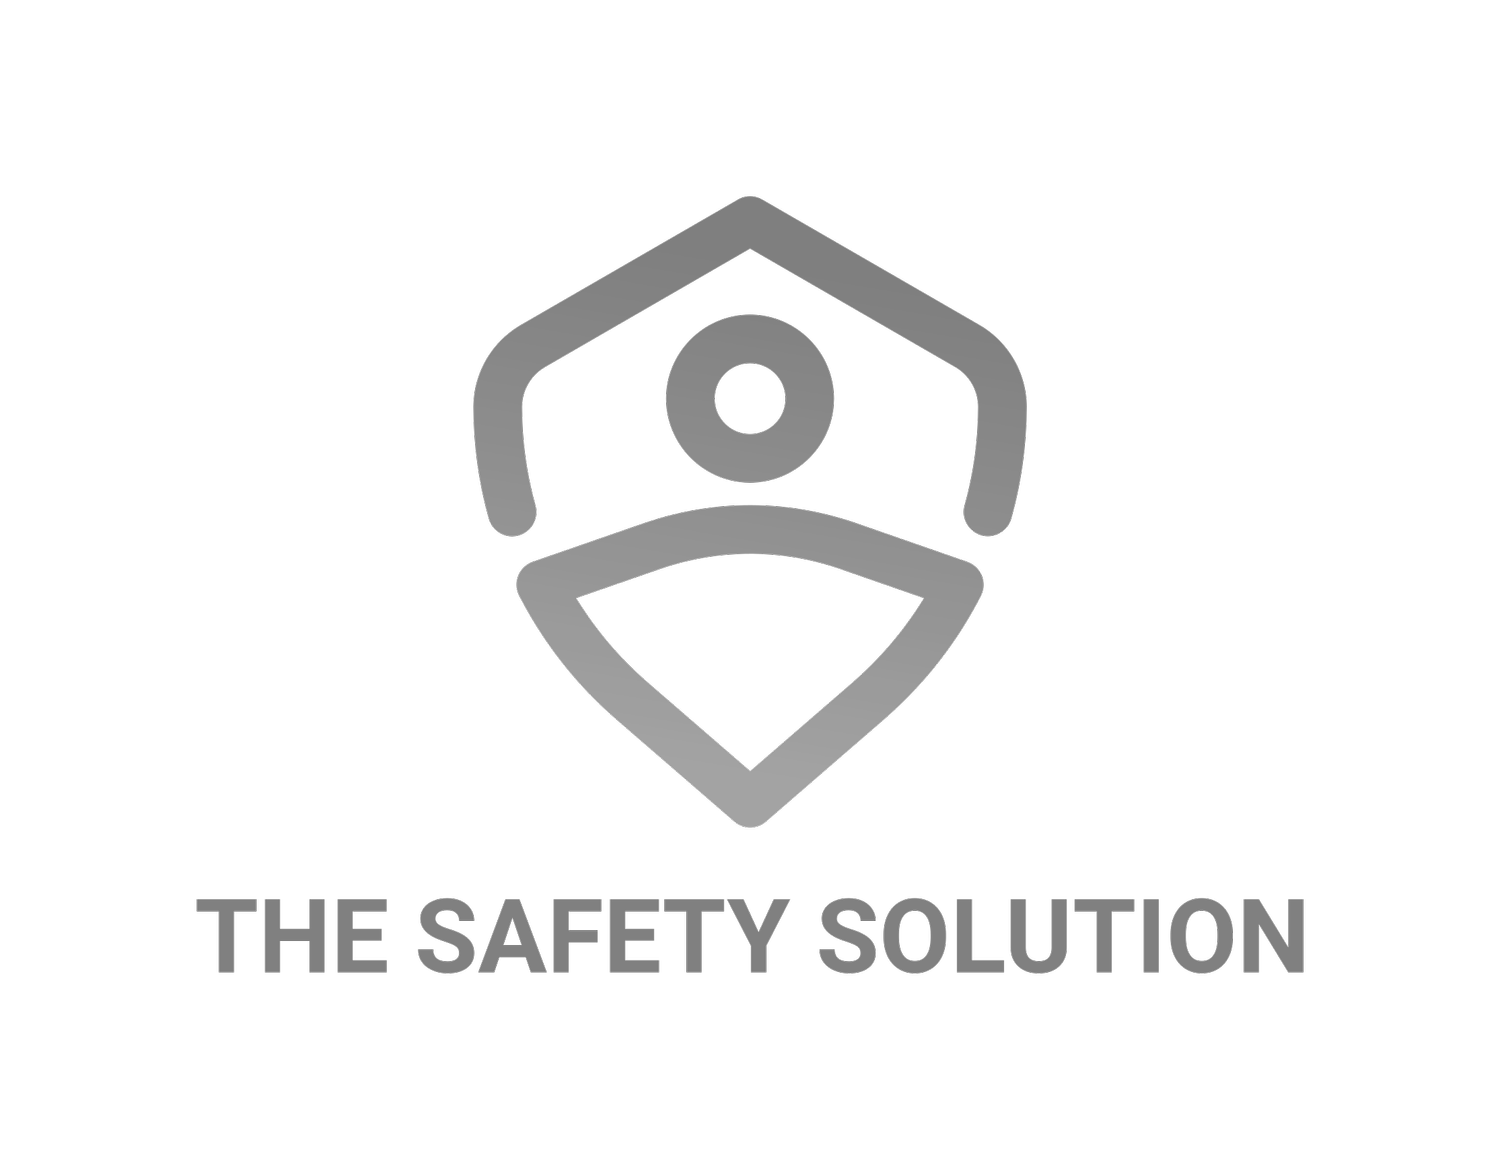 The Safety Solution